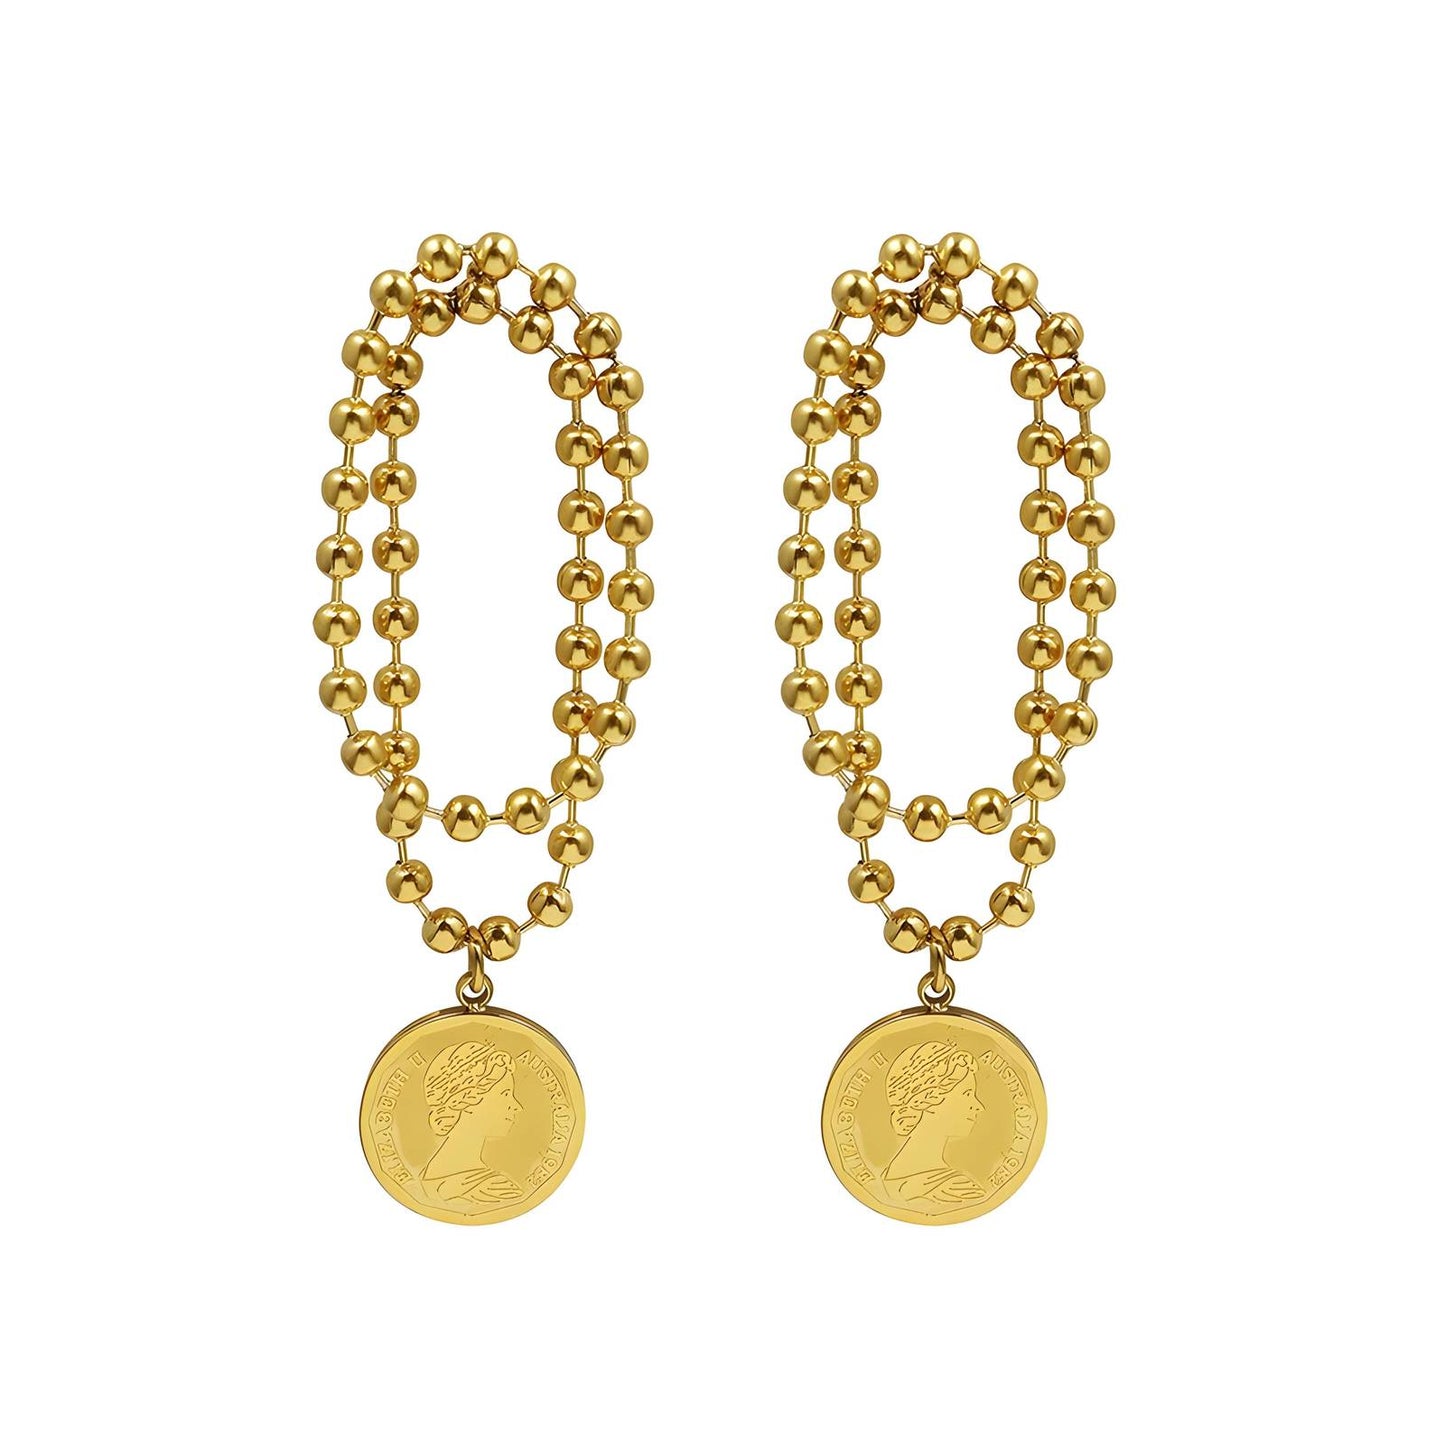 18K gold plated Stainless steel  Coin earrings